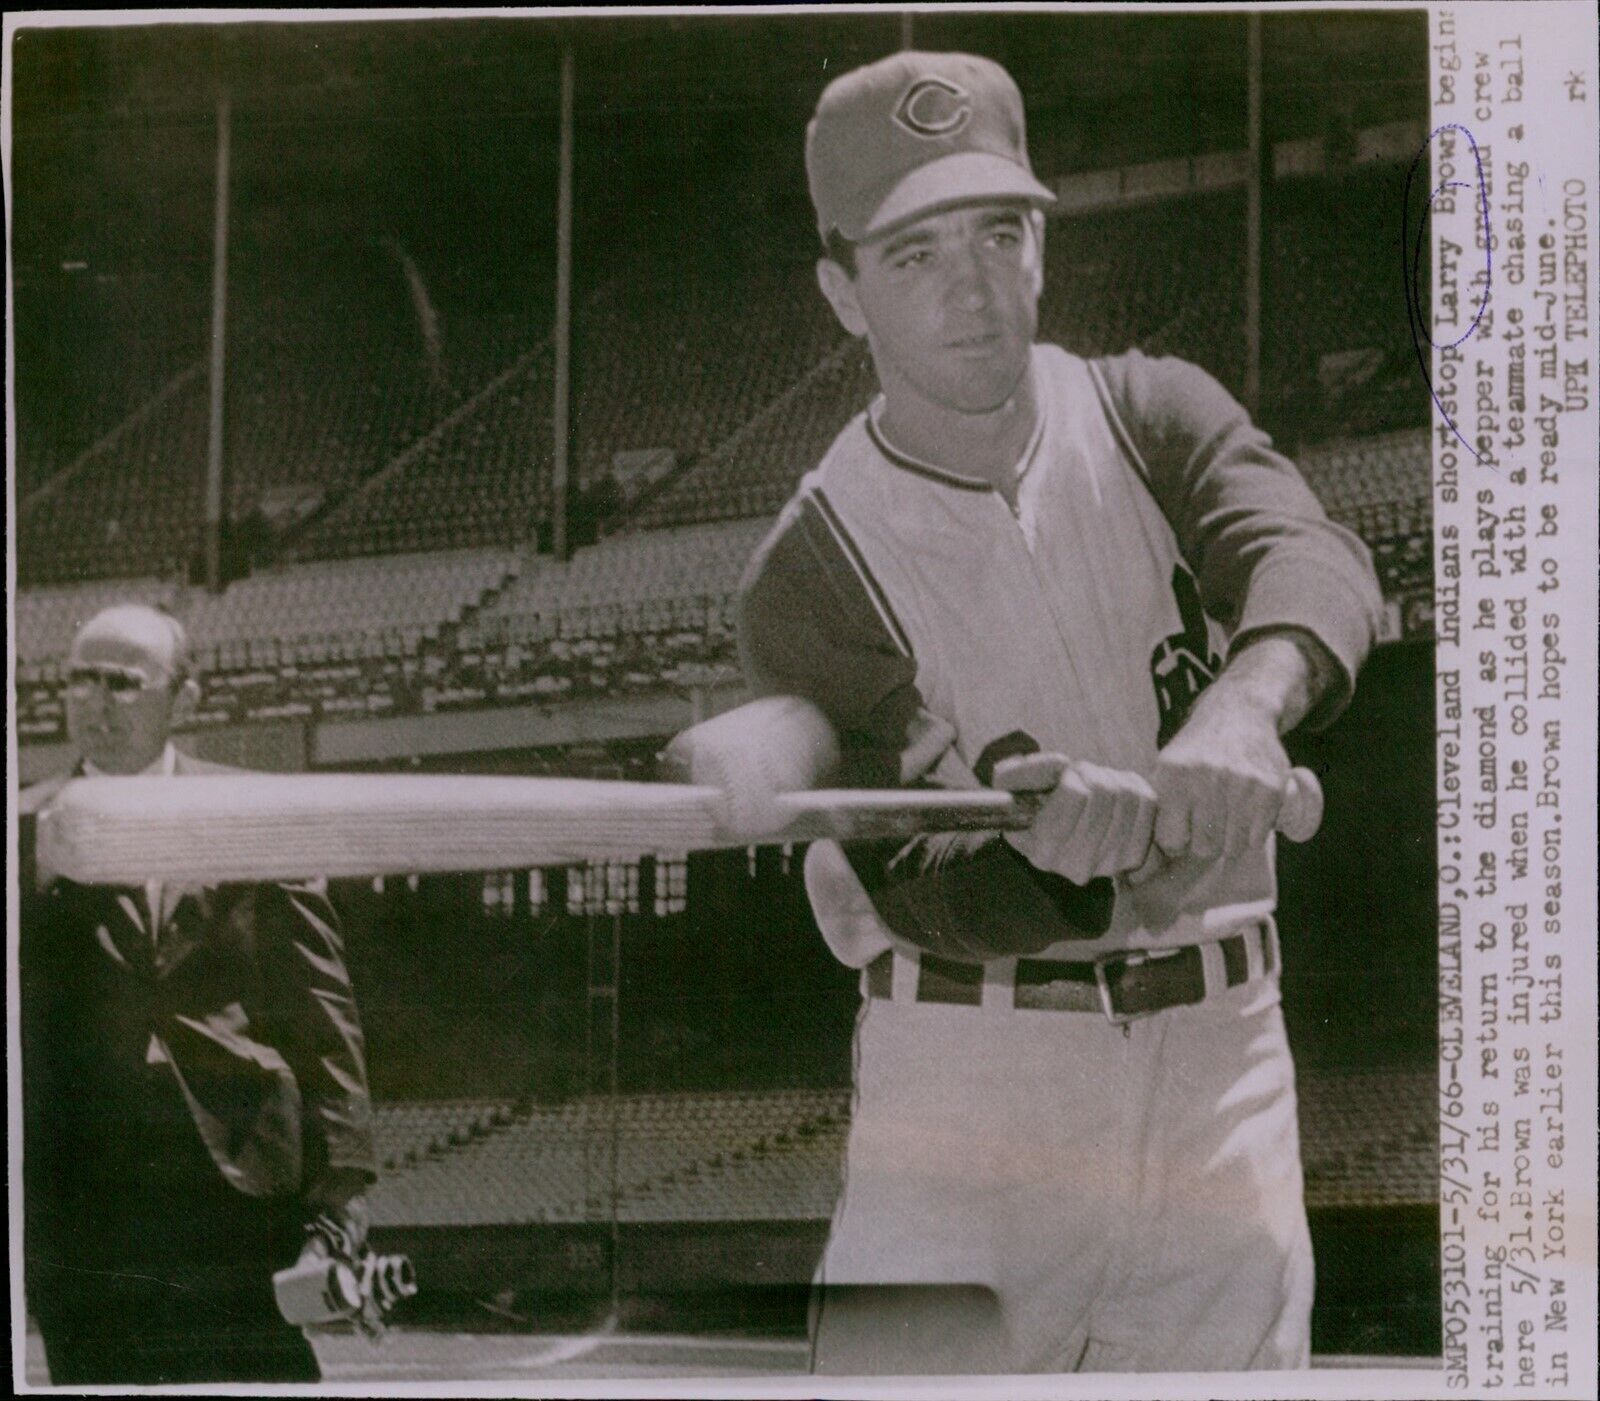 LG830 1966 Wire Photo LARRY BROWN Cleveland Indians Baseball Shortstop Swinging